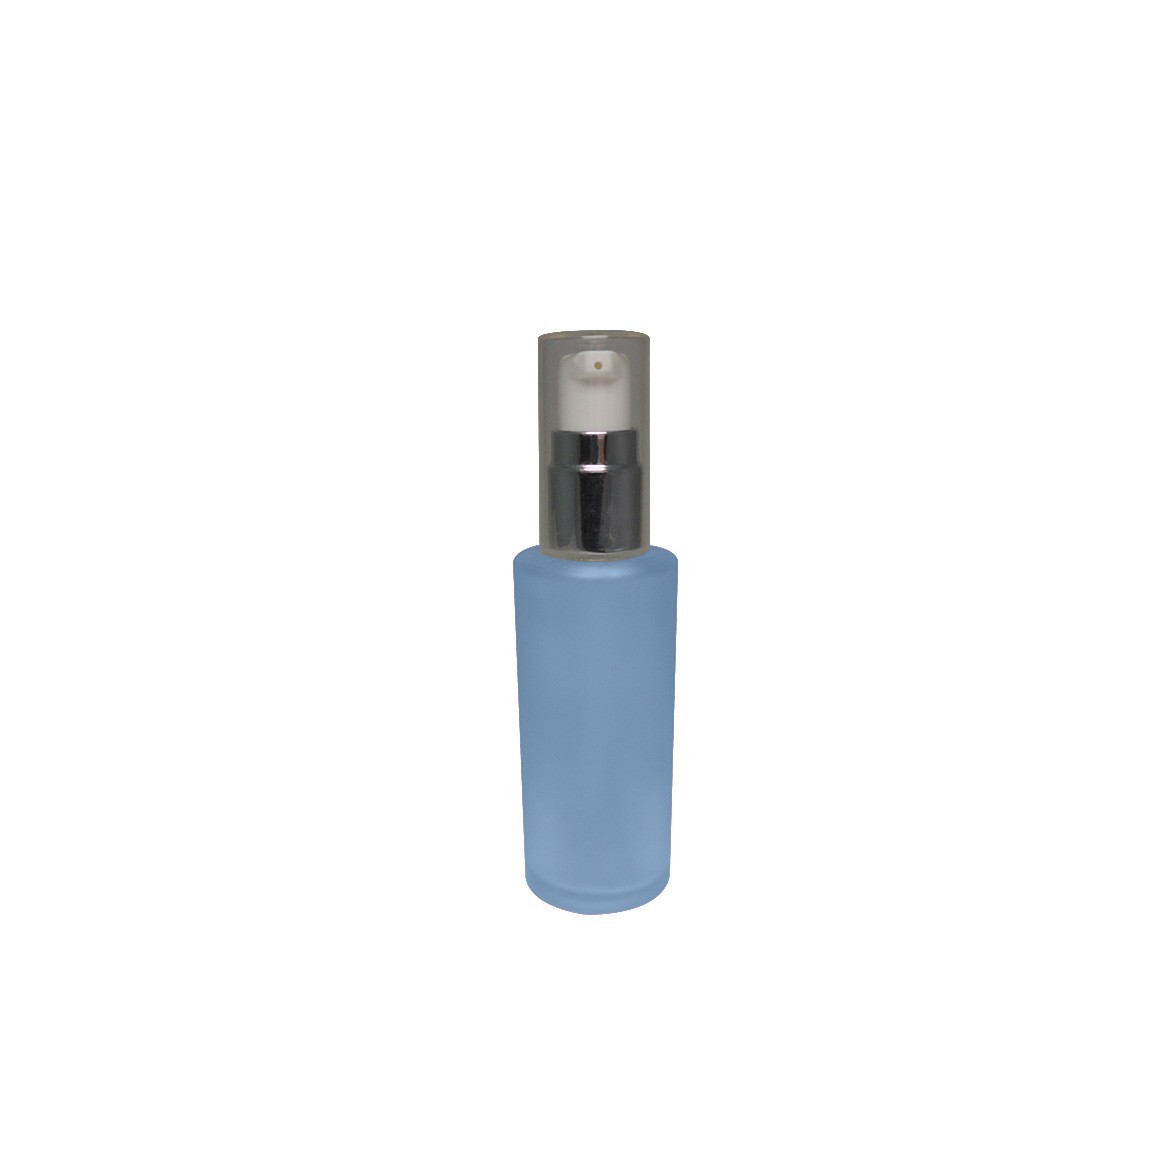 Spray blue color elegance design empty 50ml cylinder glass bottle with silver collar cosmetic lotion pump 18/415 neck size cream pump